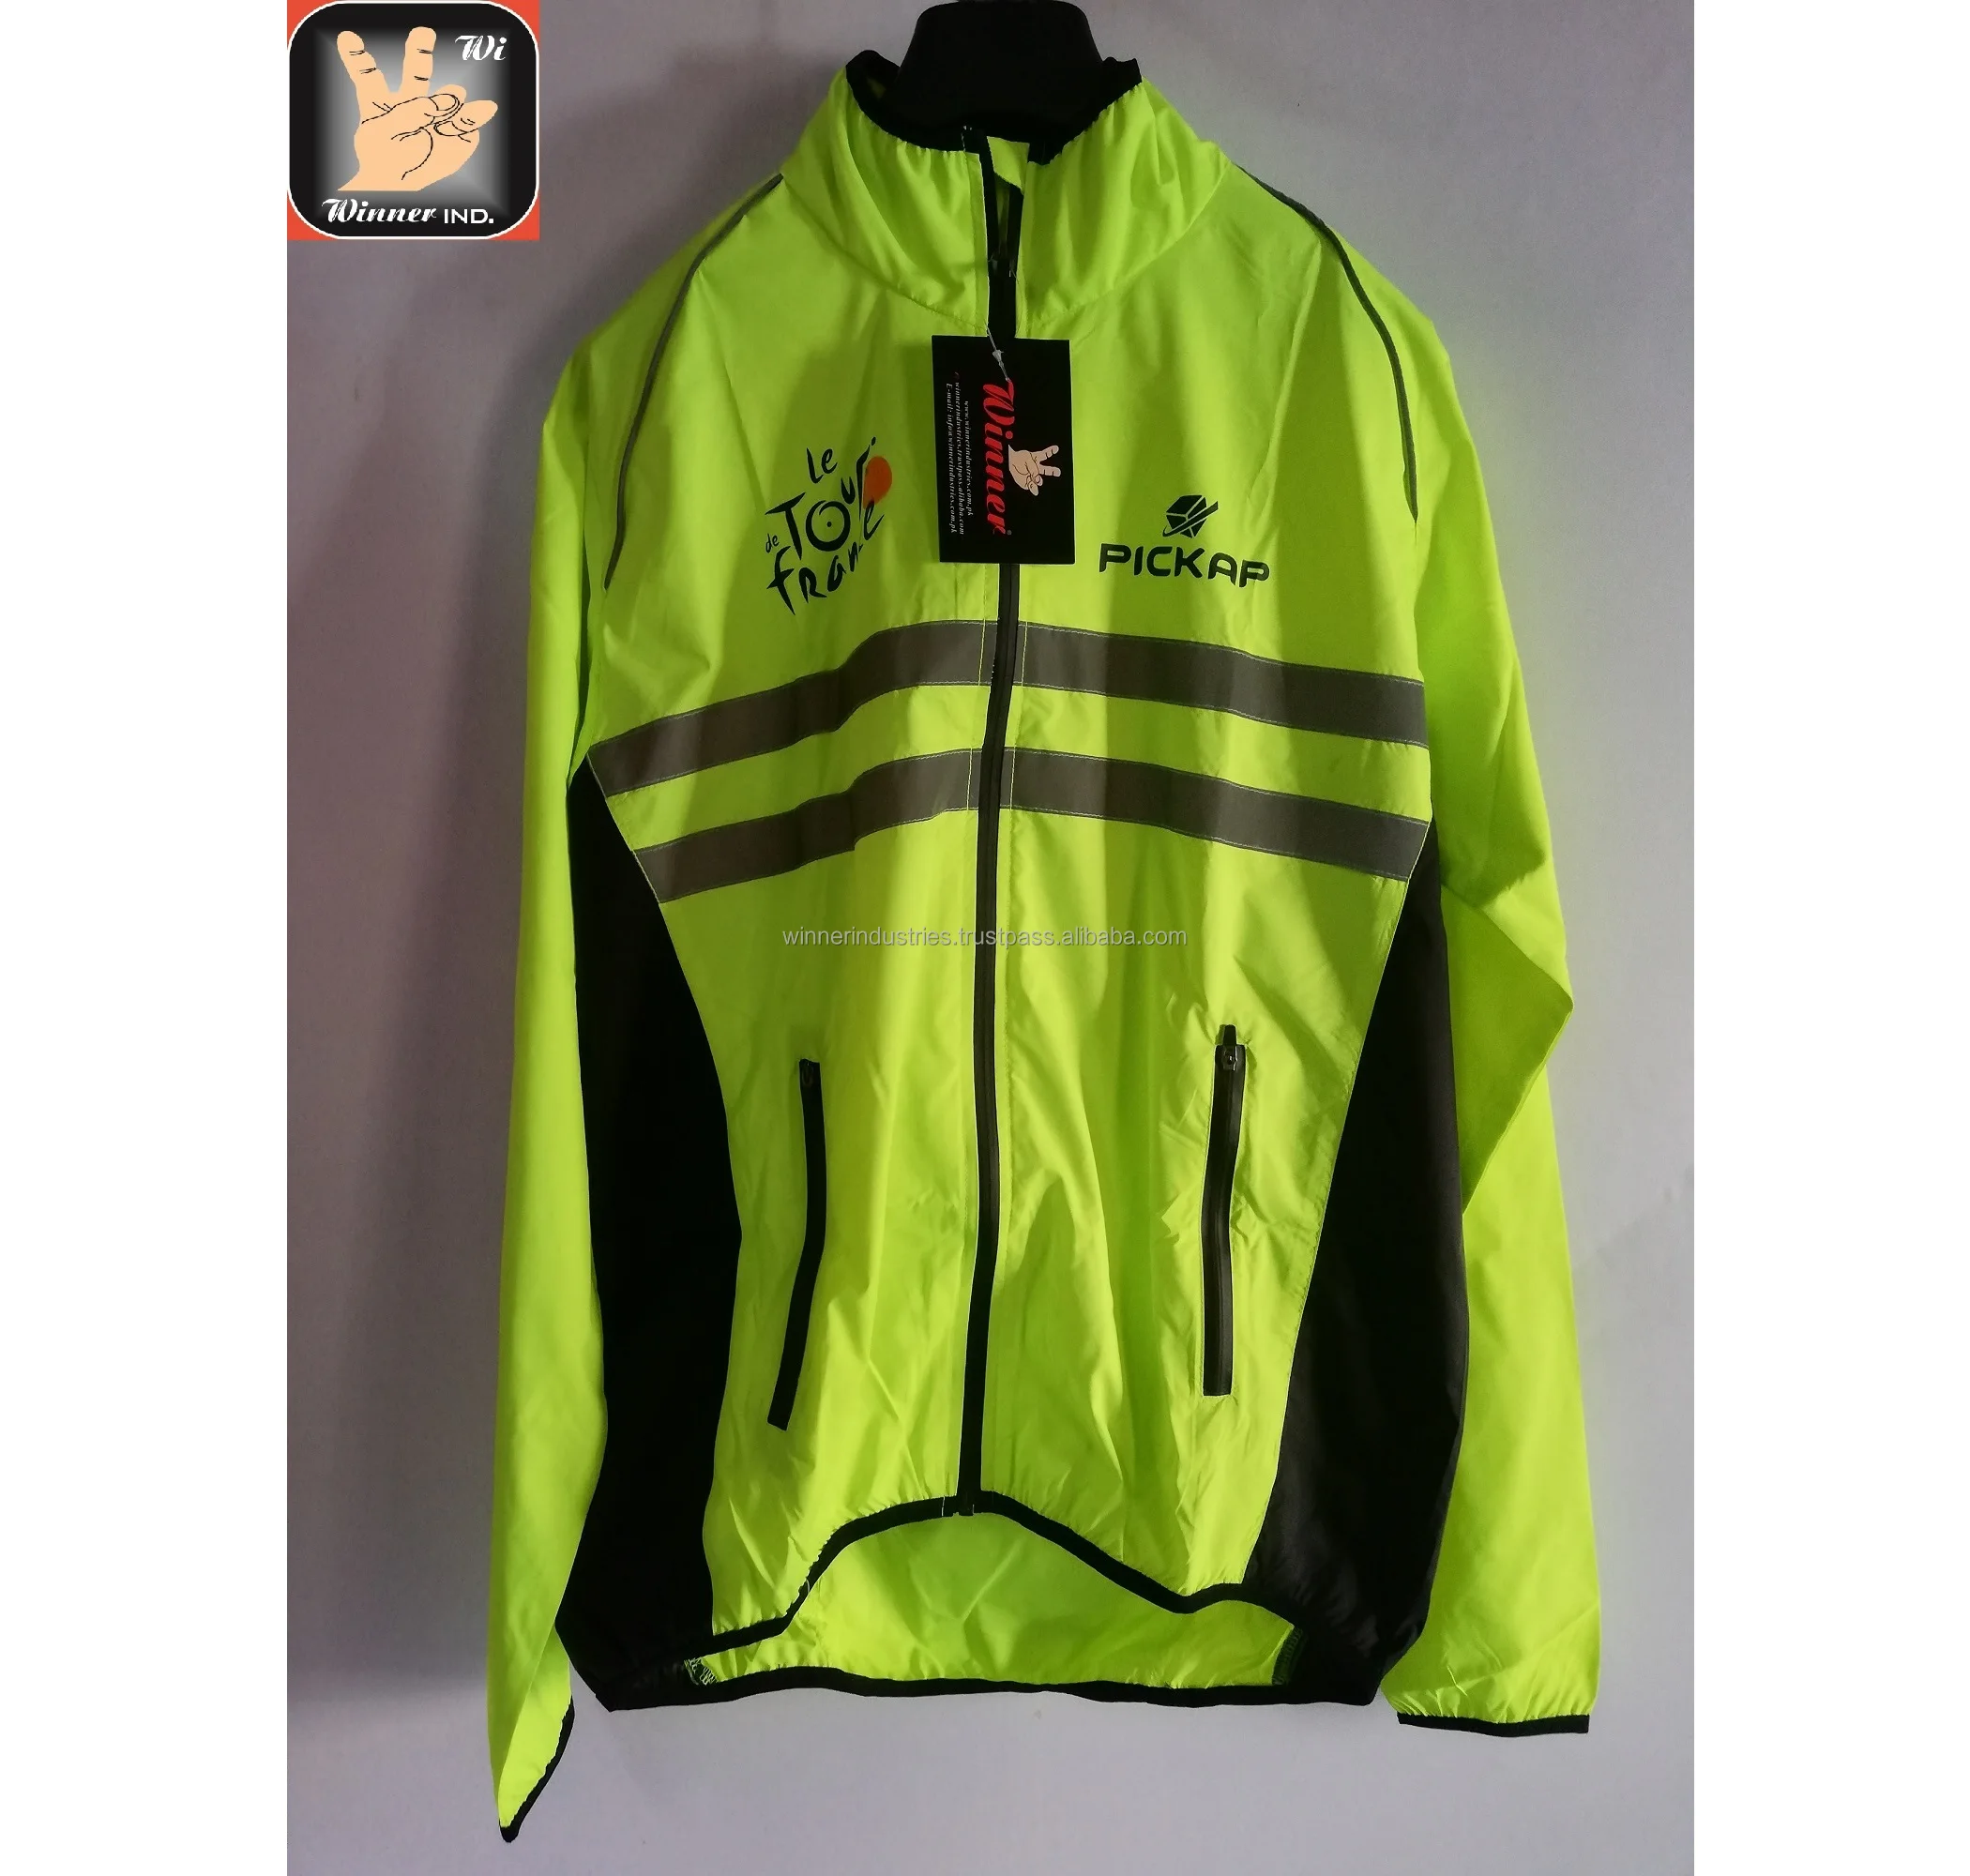 visibility jacket for cycling